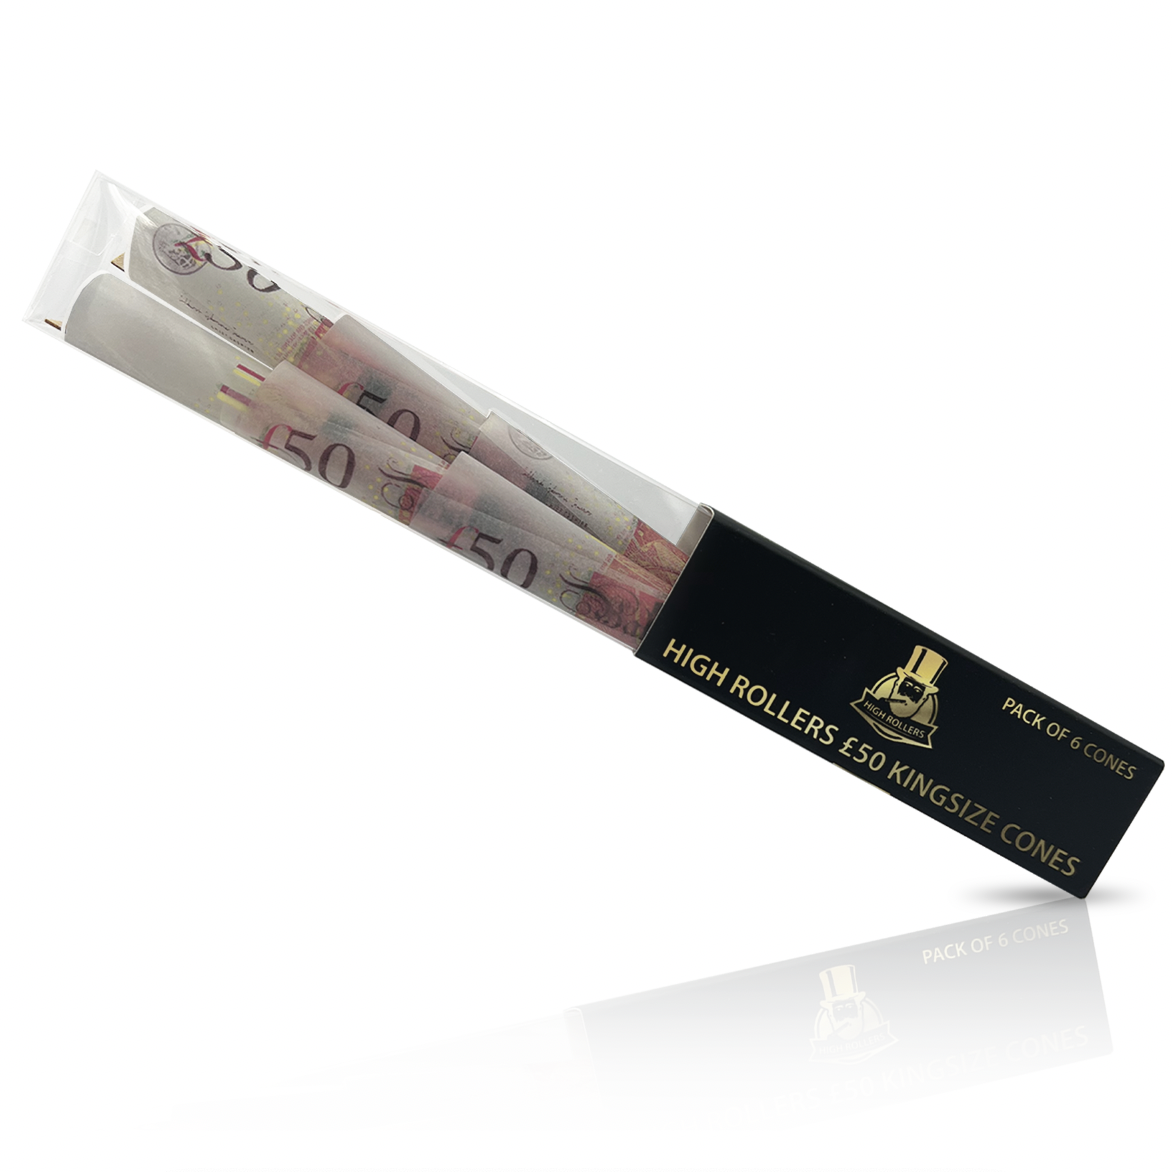 High Rollers £50 Note pre-Rolled Cones (6 Pack)